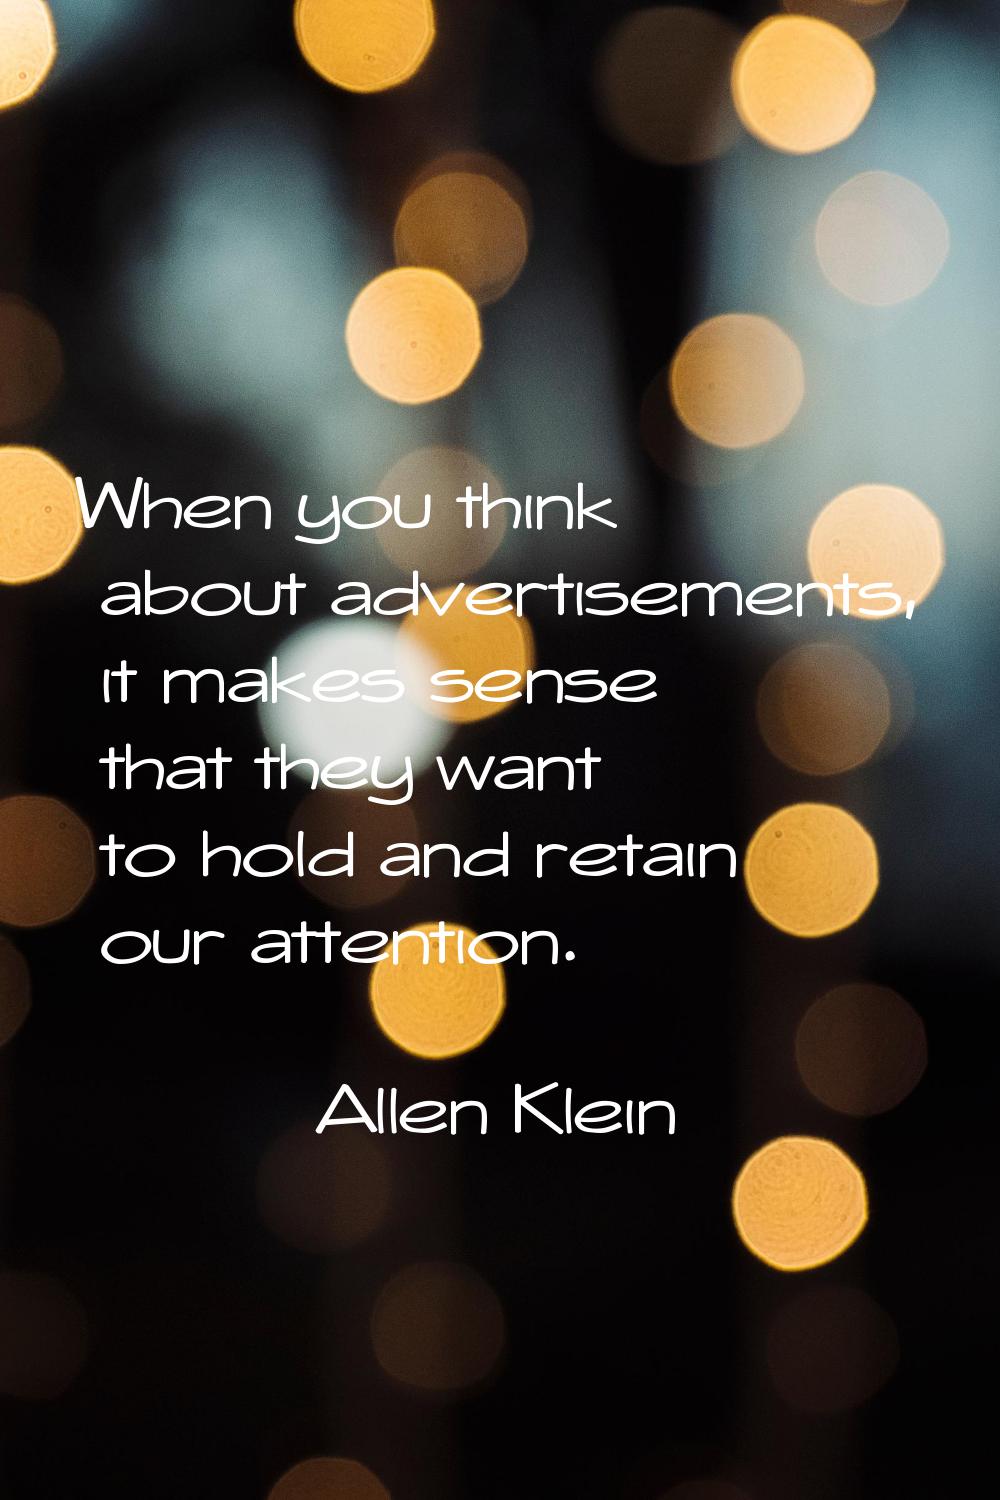 When you think about advertisements, it makes sense that they want to hold and retain our attention